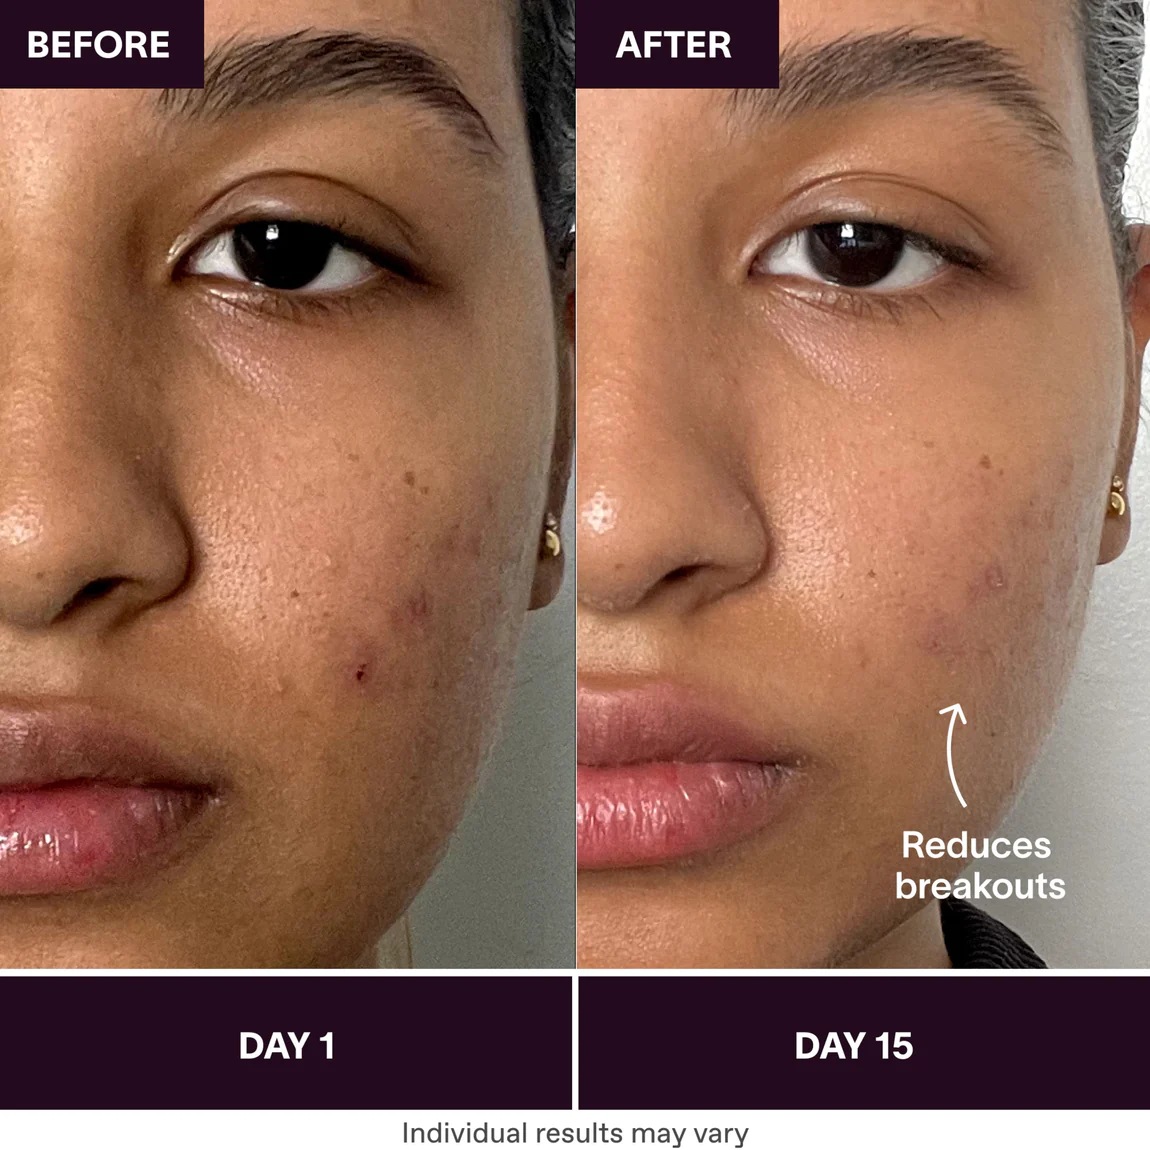 Ondaum World's Mini Acne Solution before and after result